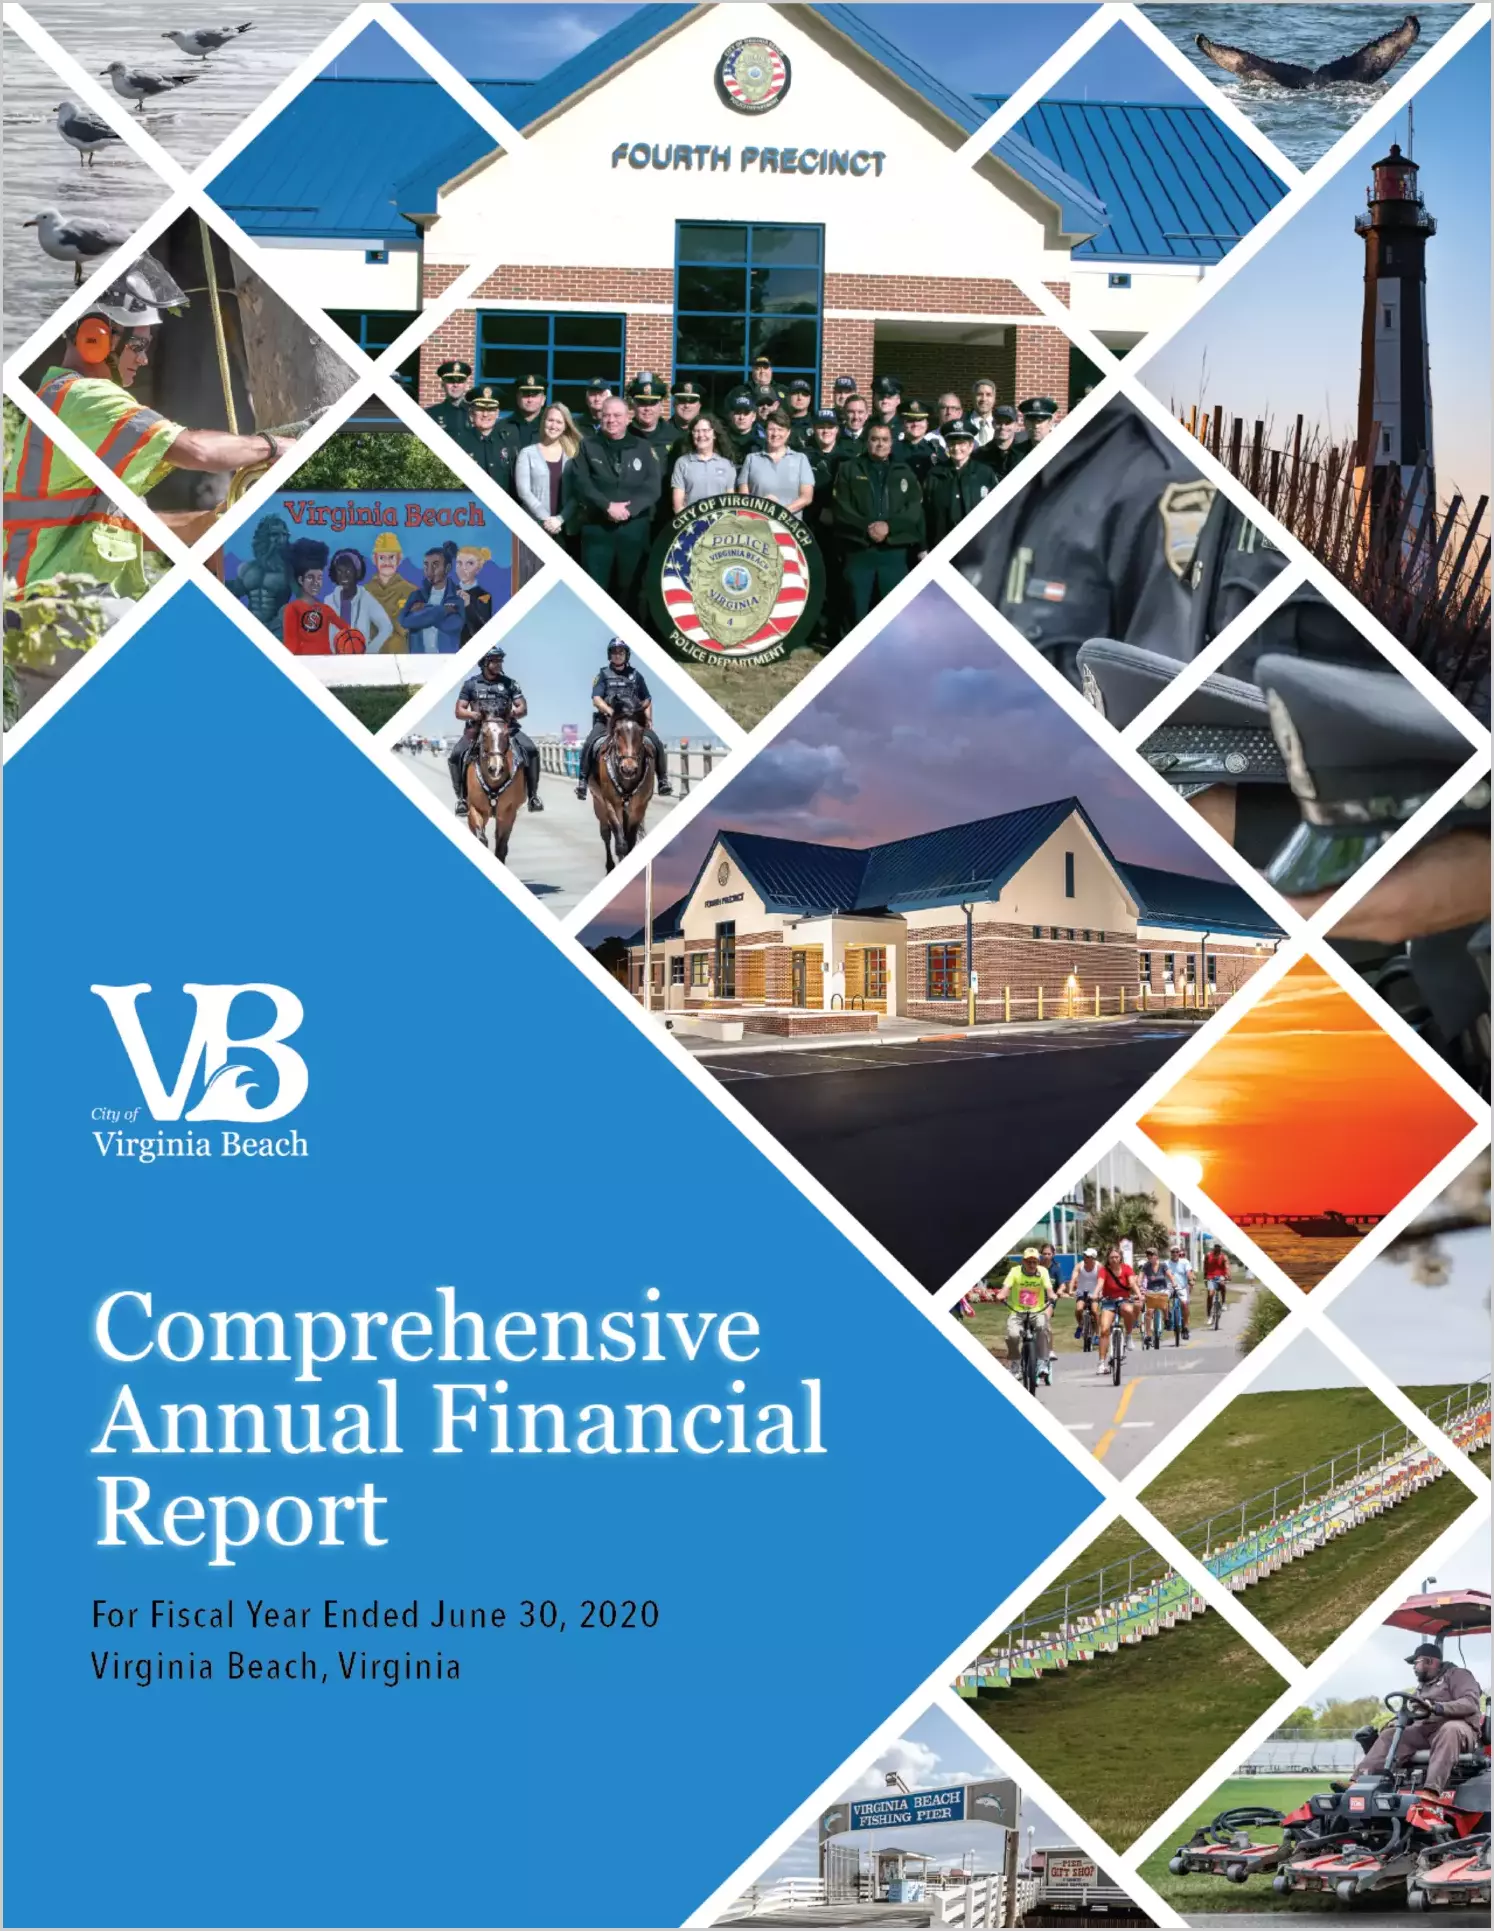 2020 Annual Financial Report for City of Virginia Beach